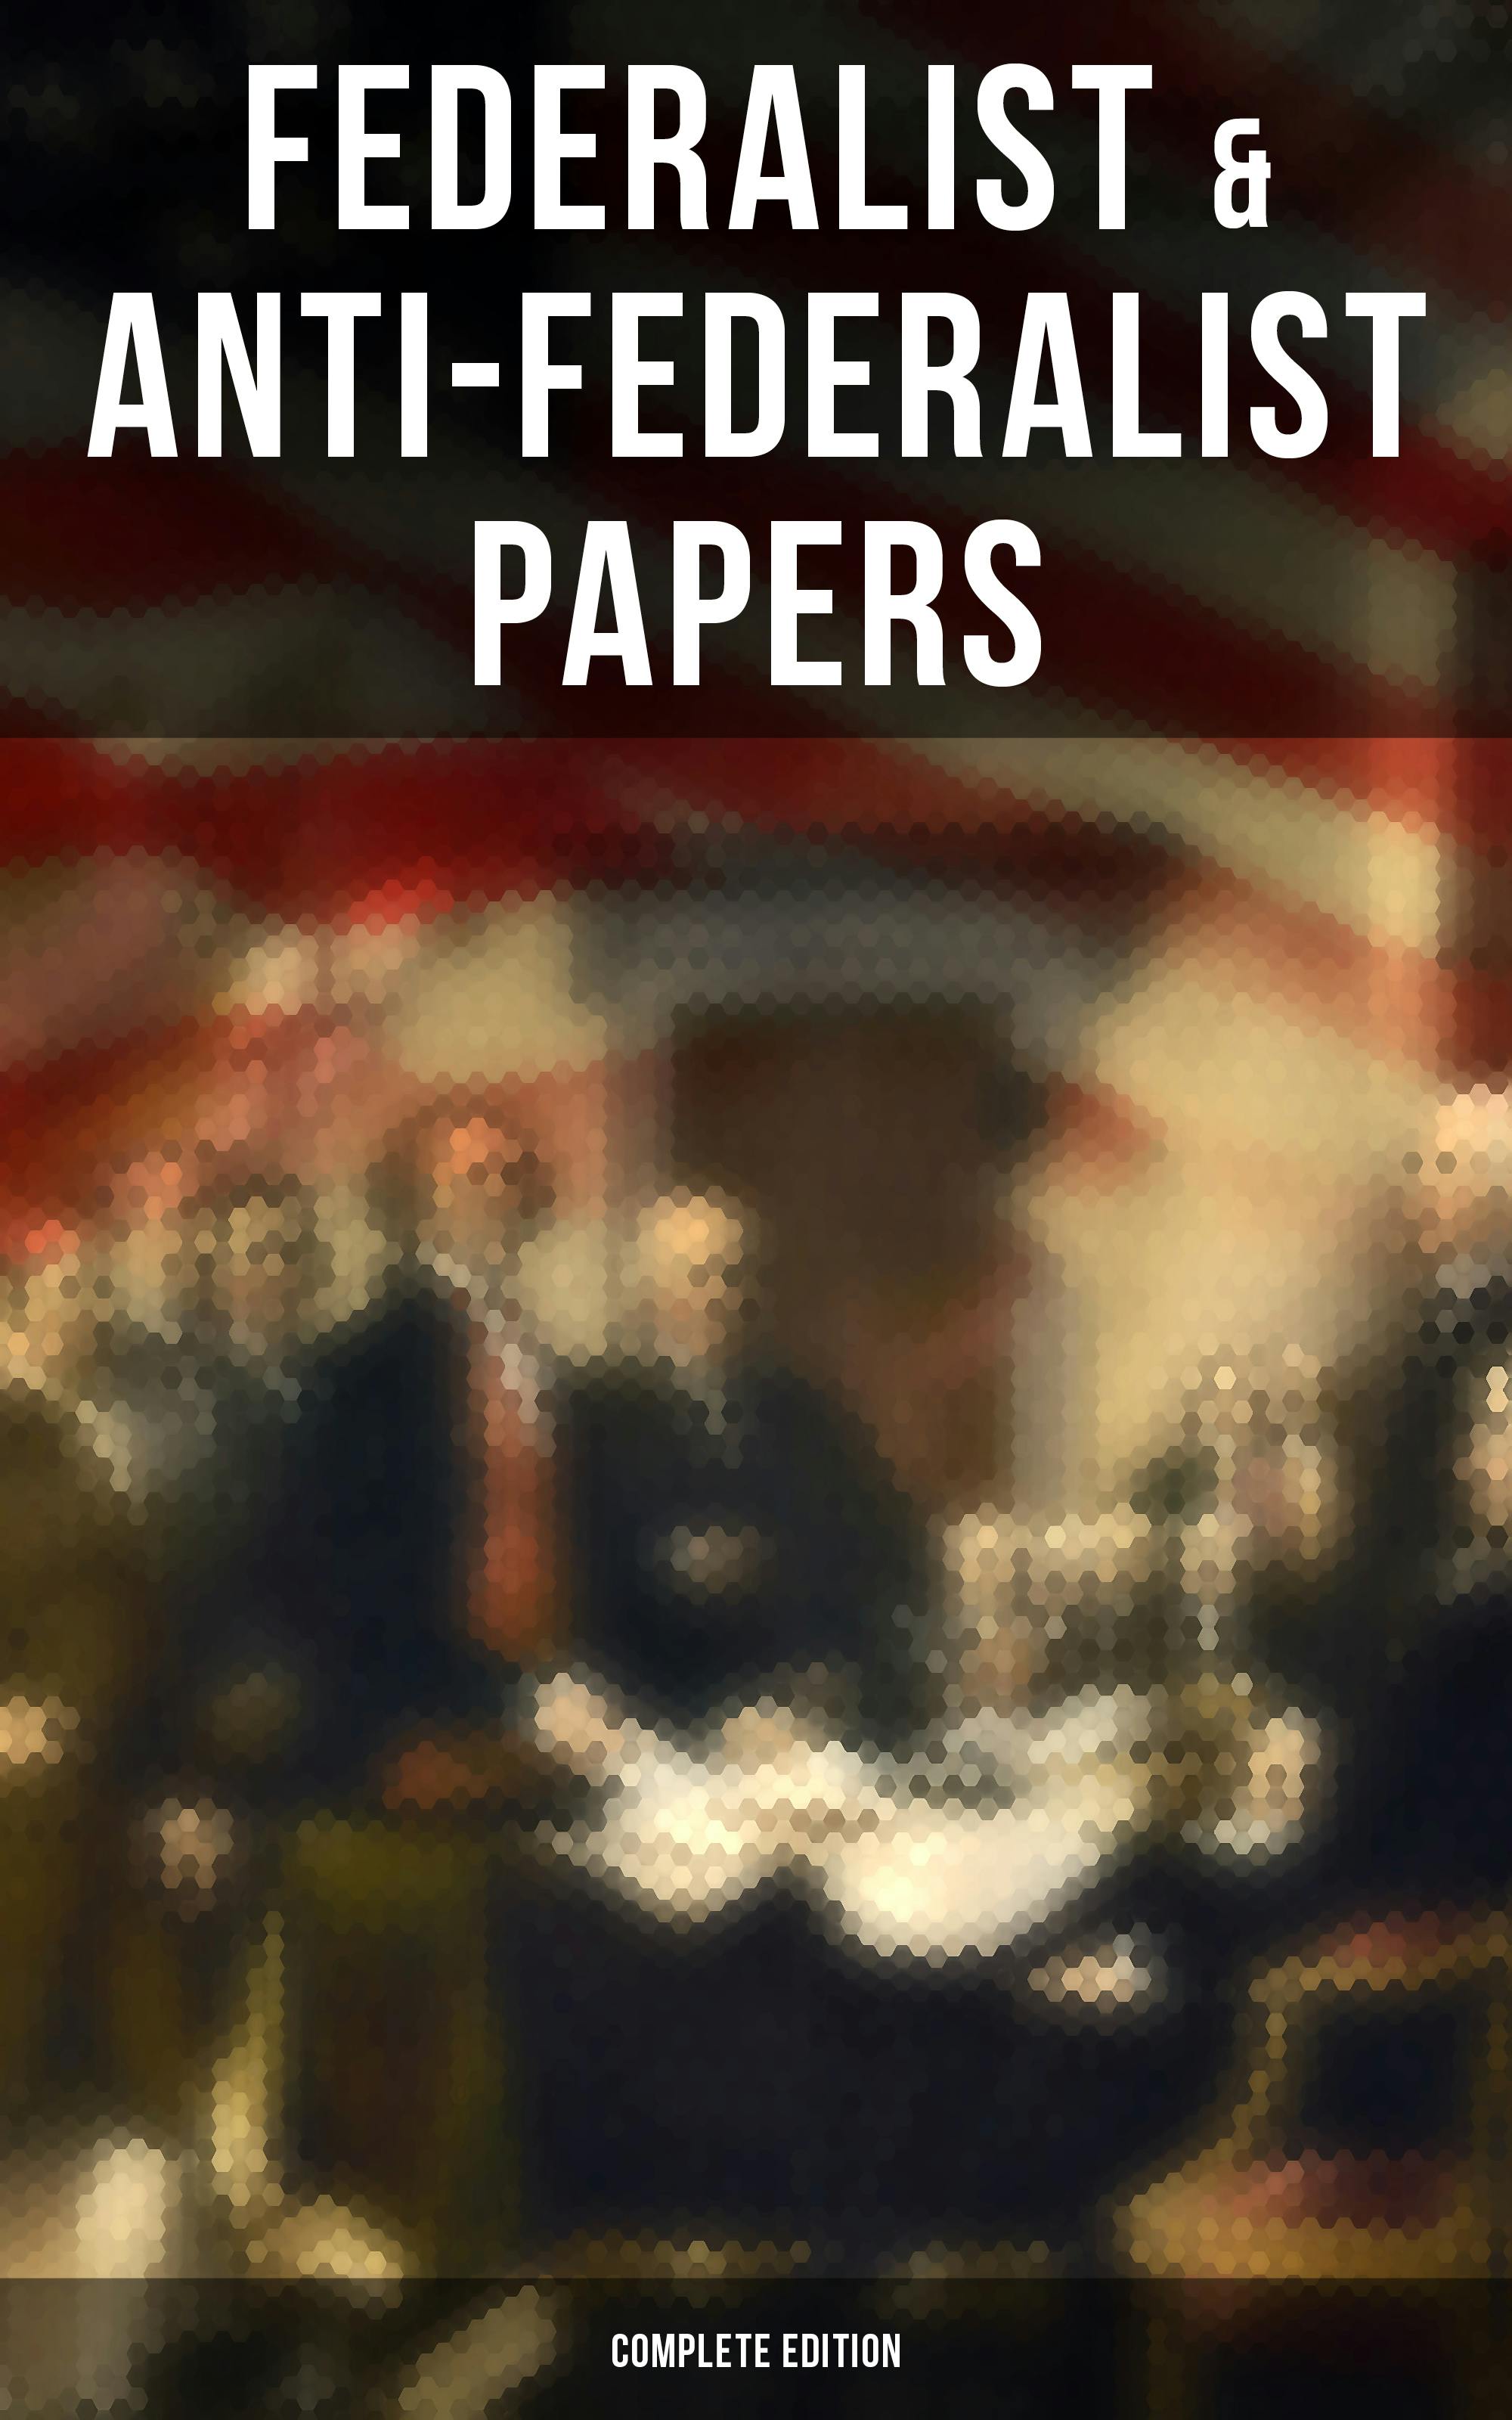 Federalist & Anti-Federalist Papers - Complete Edition: U.S. Constitution, Declaration of Independence, Bill of Rights, Important Documents by the Founding Fathers & more - Patrick Henry, Samuel Bryan, James Madison, Alexander Hamilton, John Jay